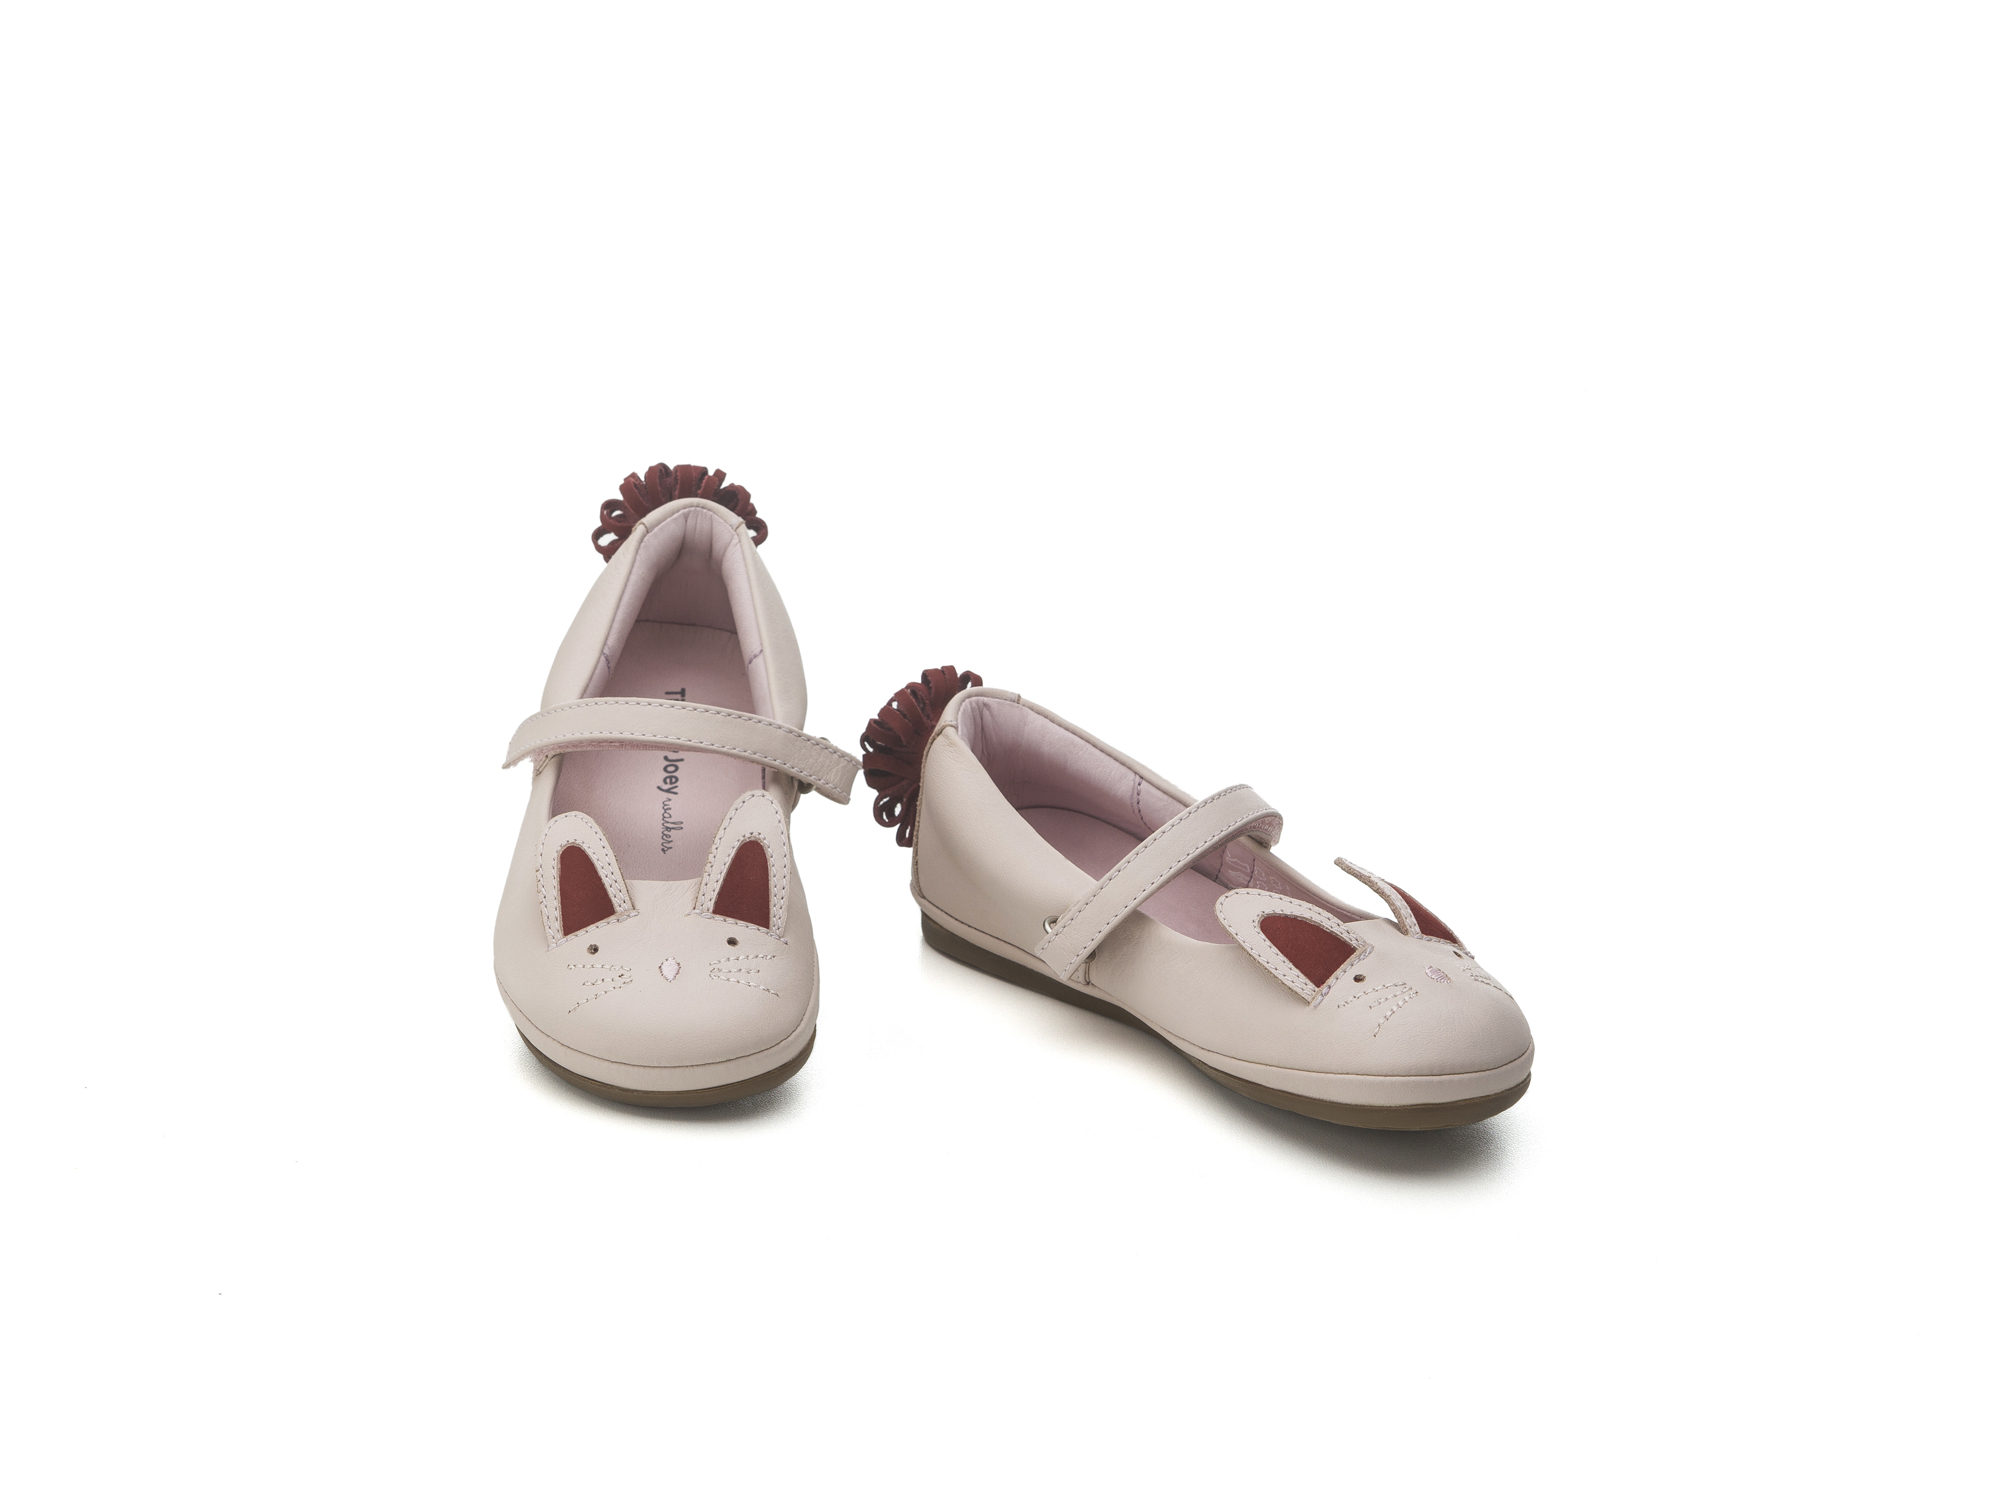 UP & GO Mary Janes for Girls Little Bunny | Tip Toey Joey - Australia - 2